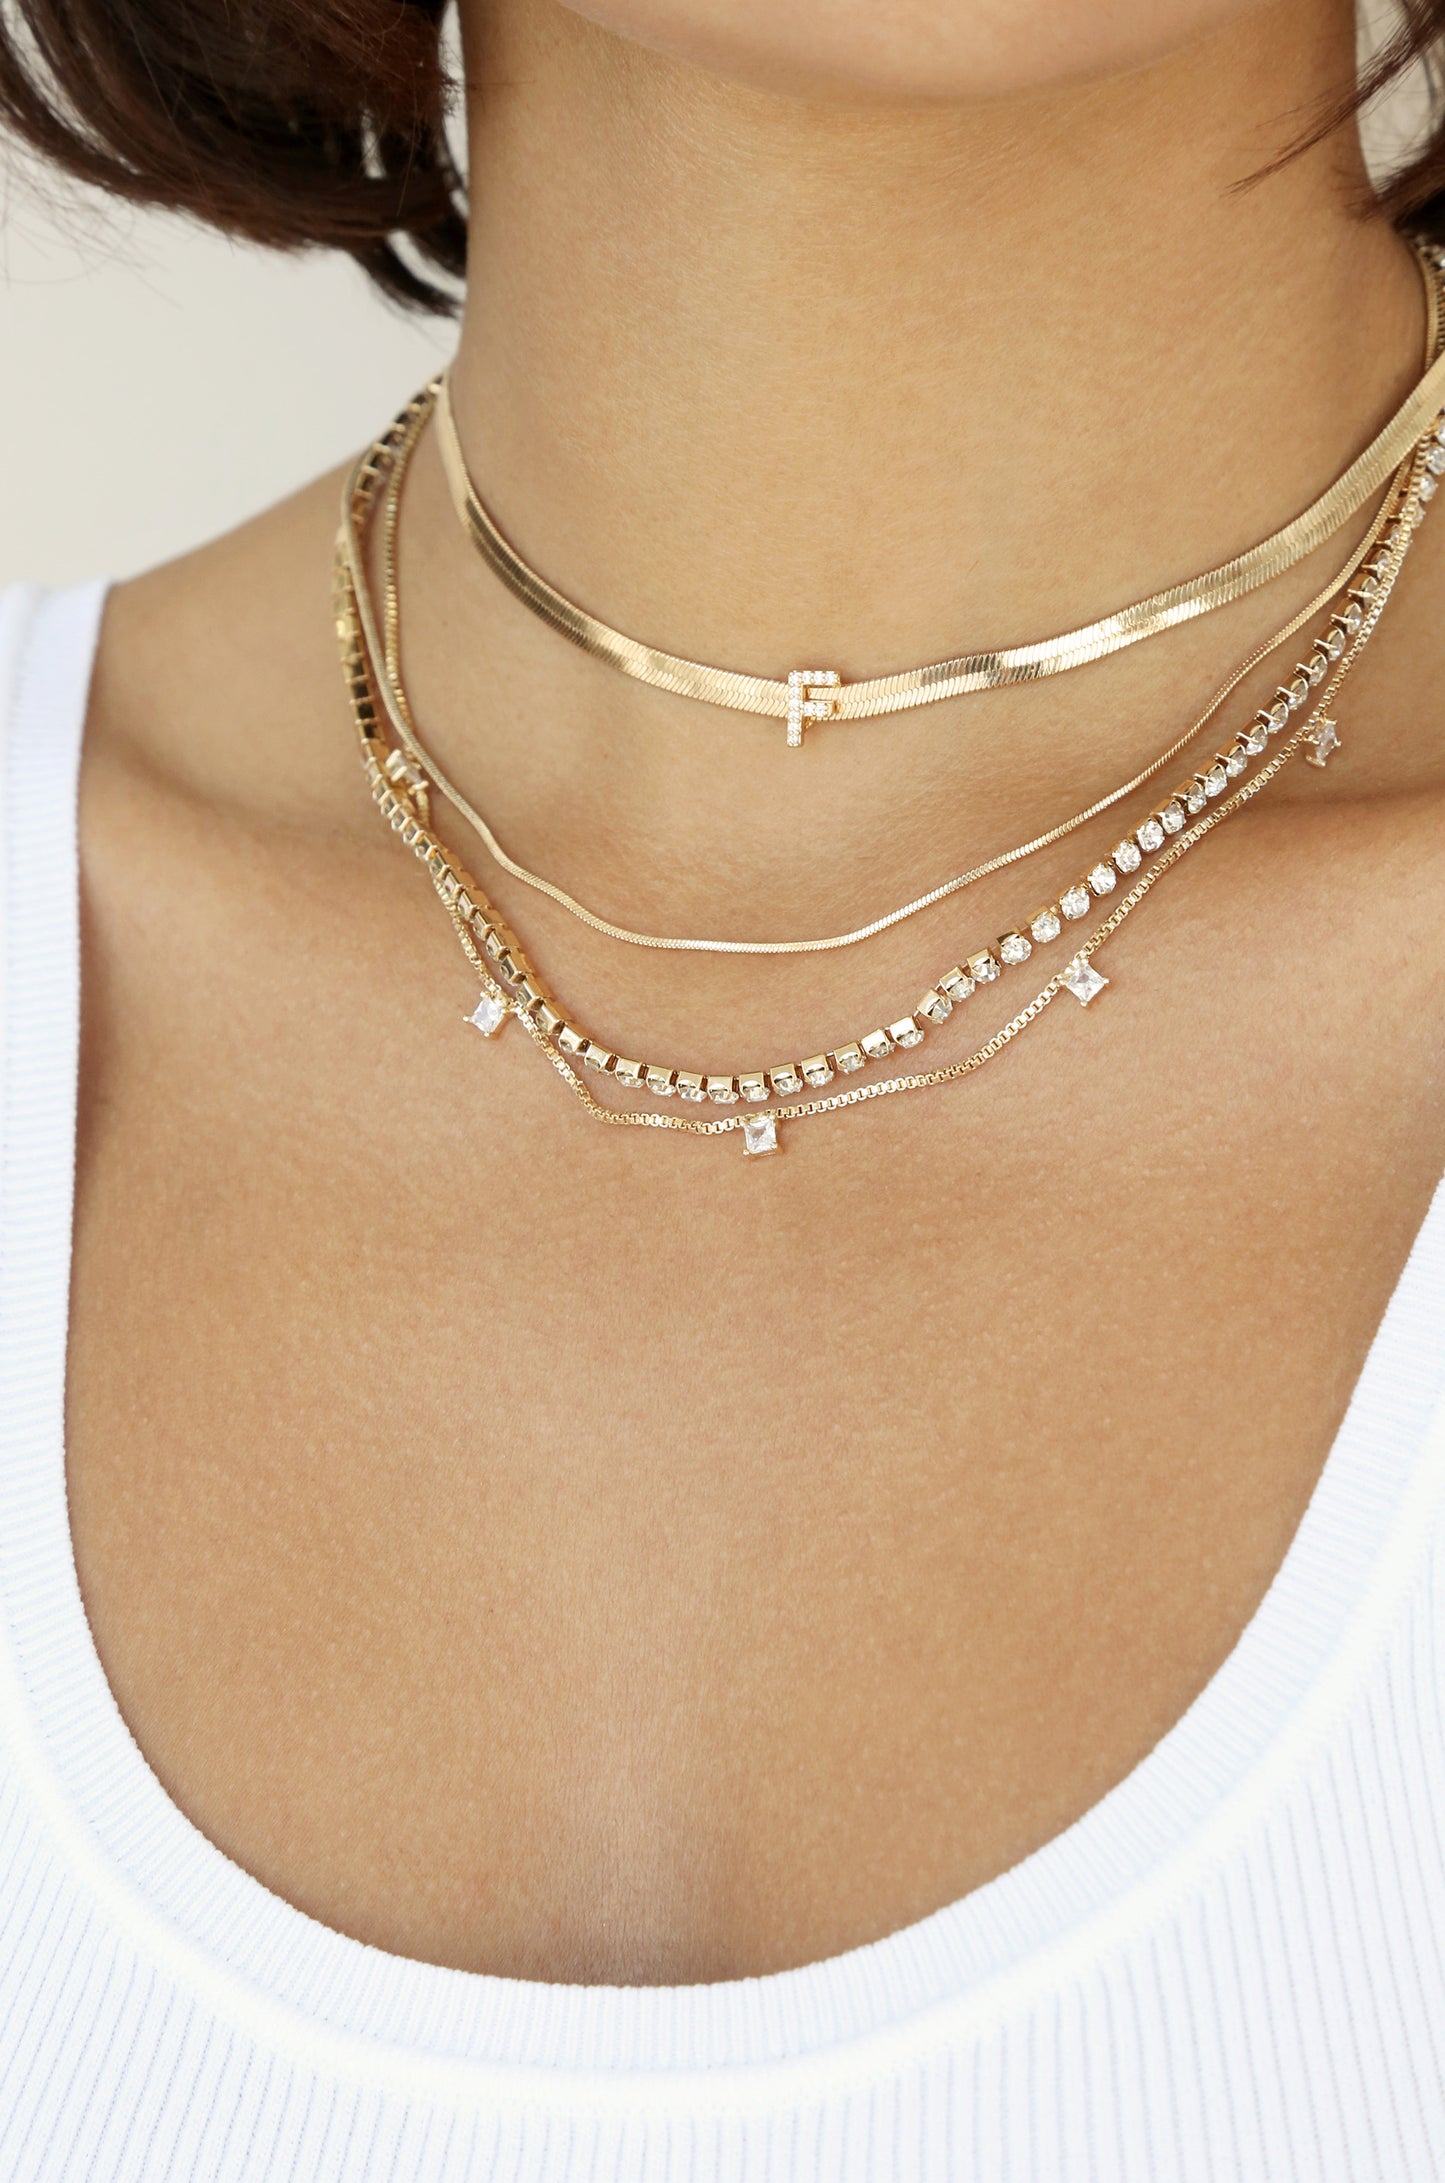 Initial Herringbone Necklace and Mixed Chain Necklace Bundle close on model